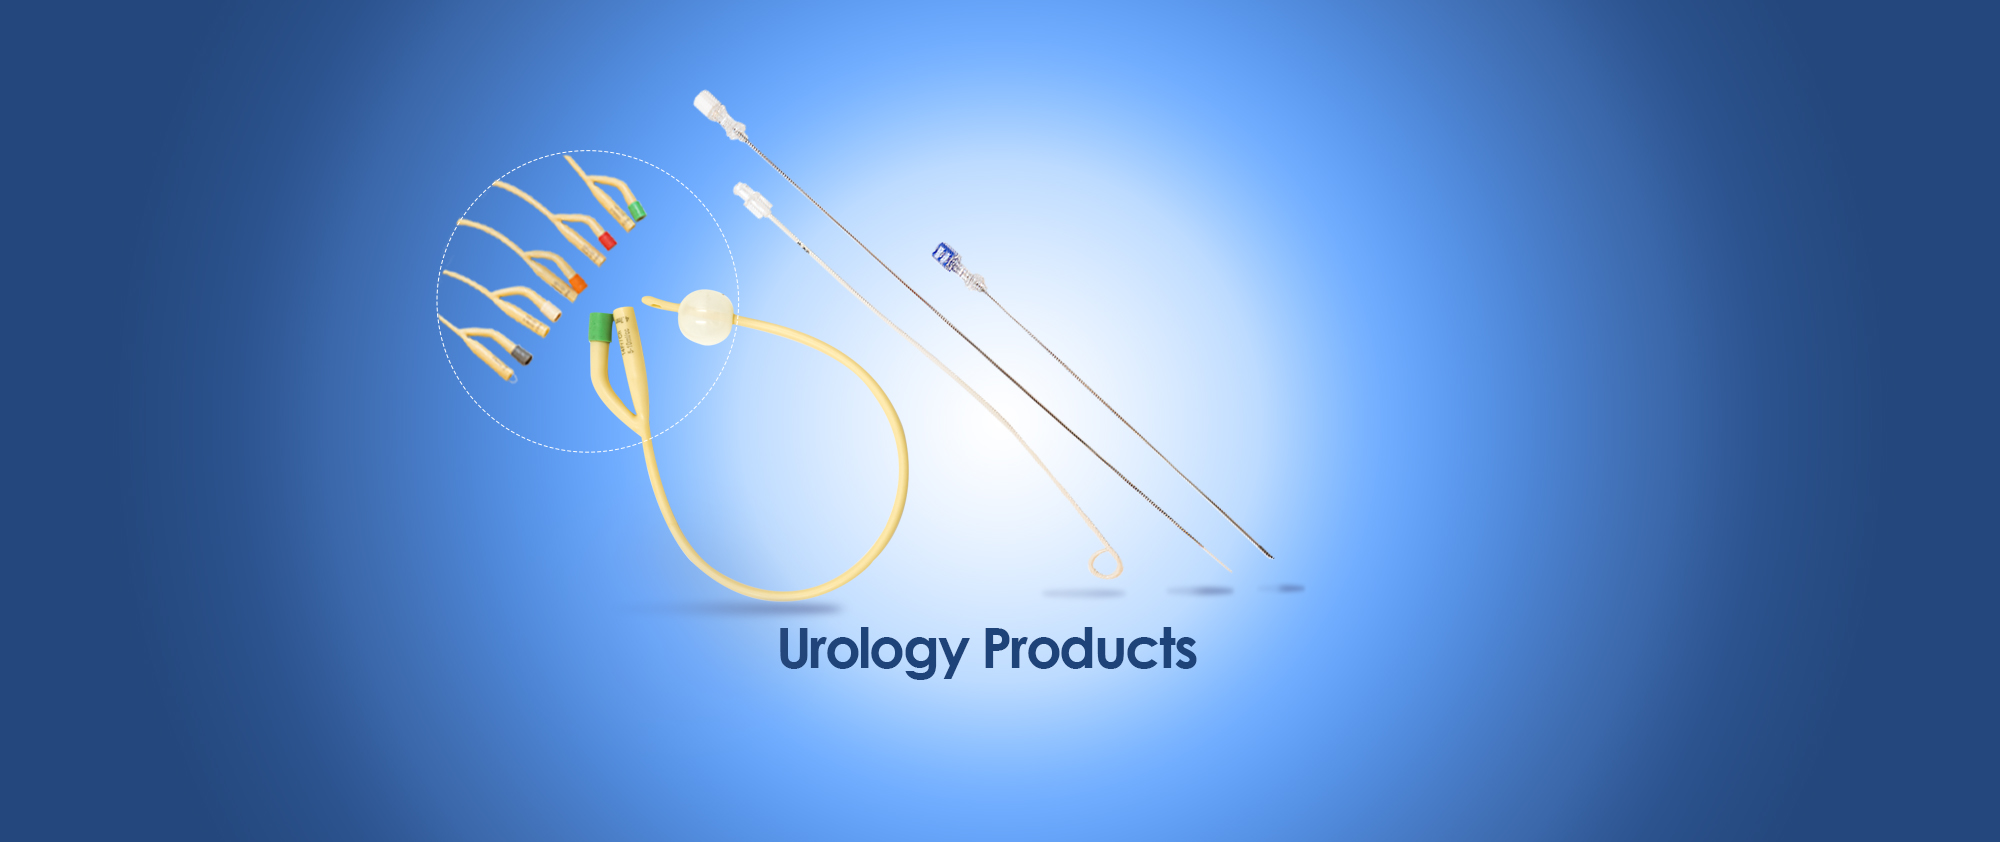 Urology Products